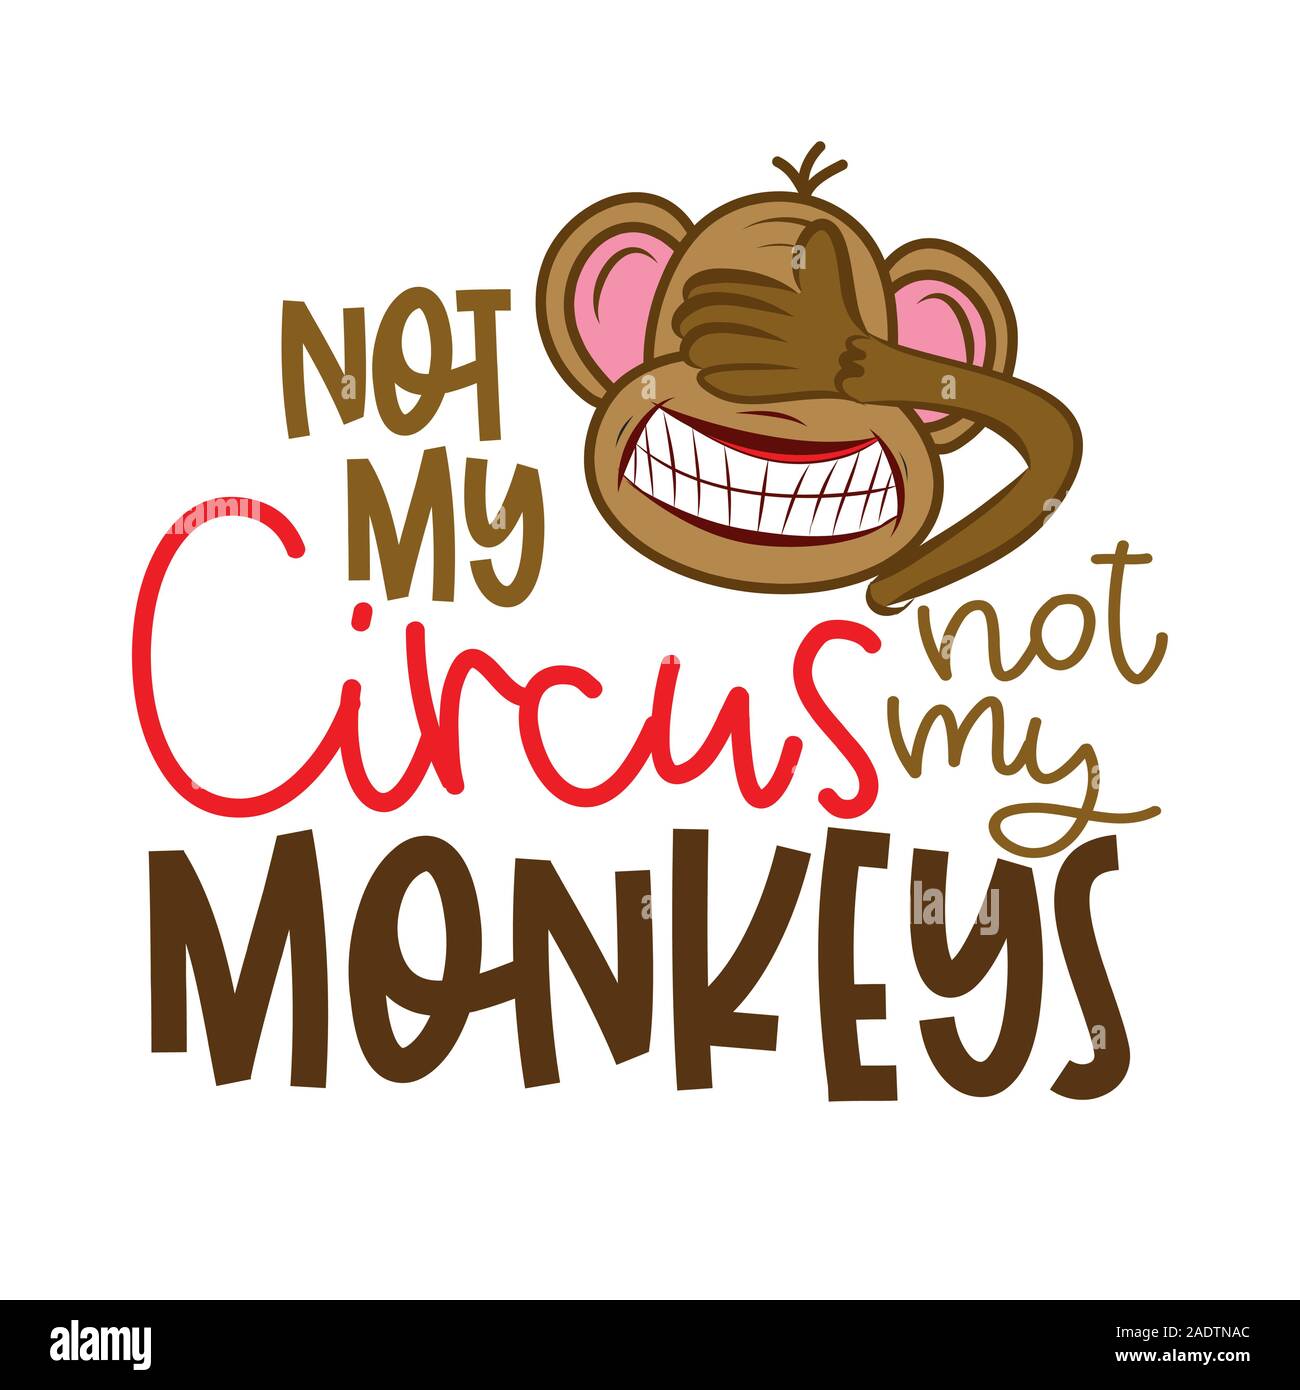 not my circus not my monkeys - funny lettering with crazy blind monkey. Handmade calligraphy vector illustration. Good for t shirts, mug, scrap bookin Stock Vector